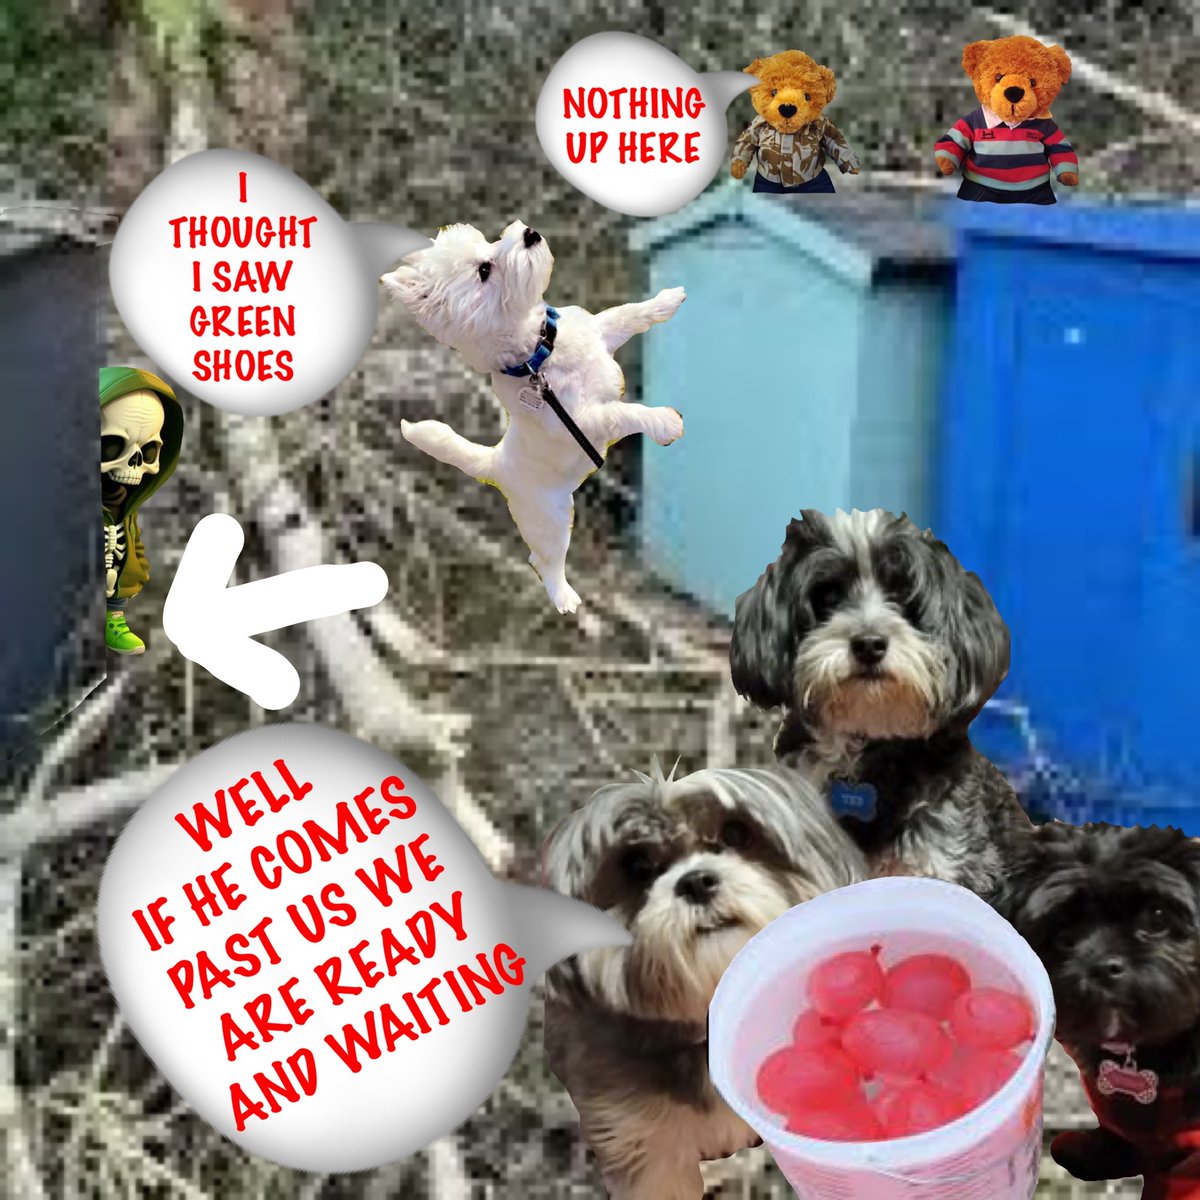 8 #zzst 🪷🌸🌹🌺🌻💐🌷🪻🌼🪷🌸🌹🌺🌻💐
OH MY WORD THEY HAVE EVEN PUSHED OVER NEWLY PLANTED TREES-- ZOMBIES  ARE SOOO DISTRUCTIVE....

HE'S BEHIND YOU👿